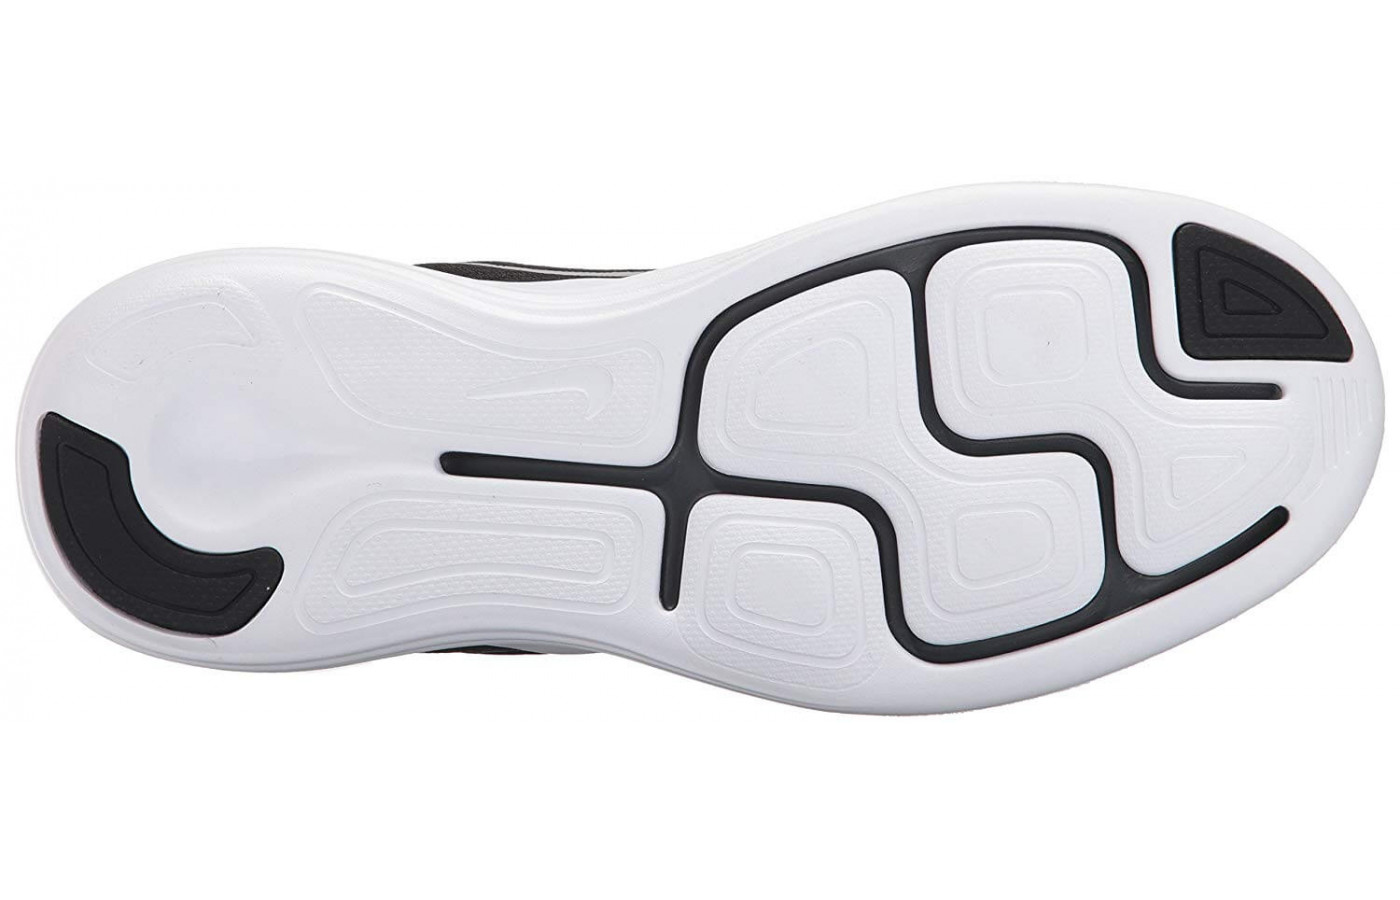 The LunarConverge's outsole features suction cup construction